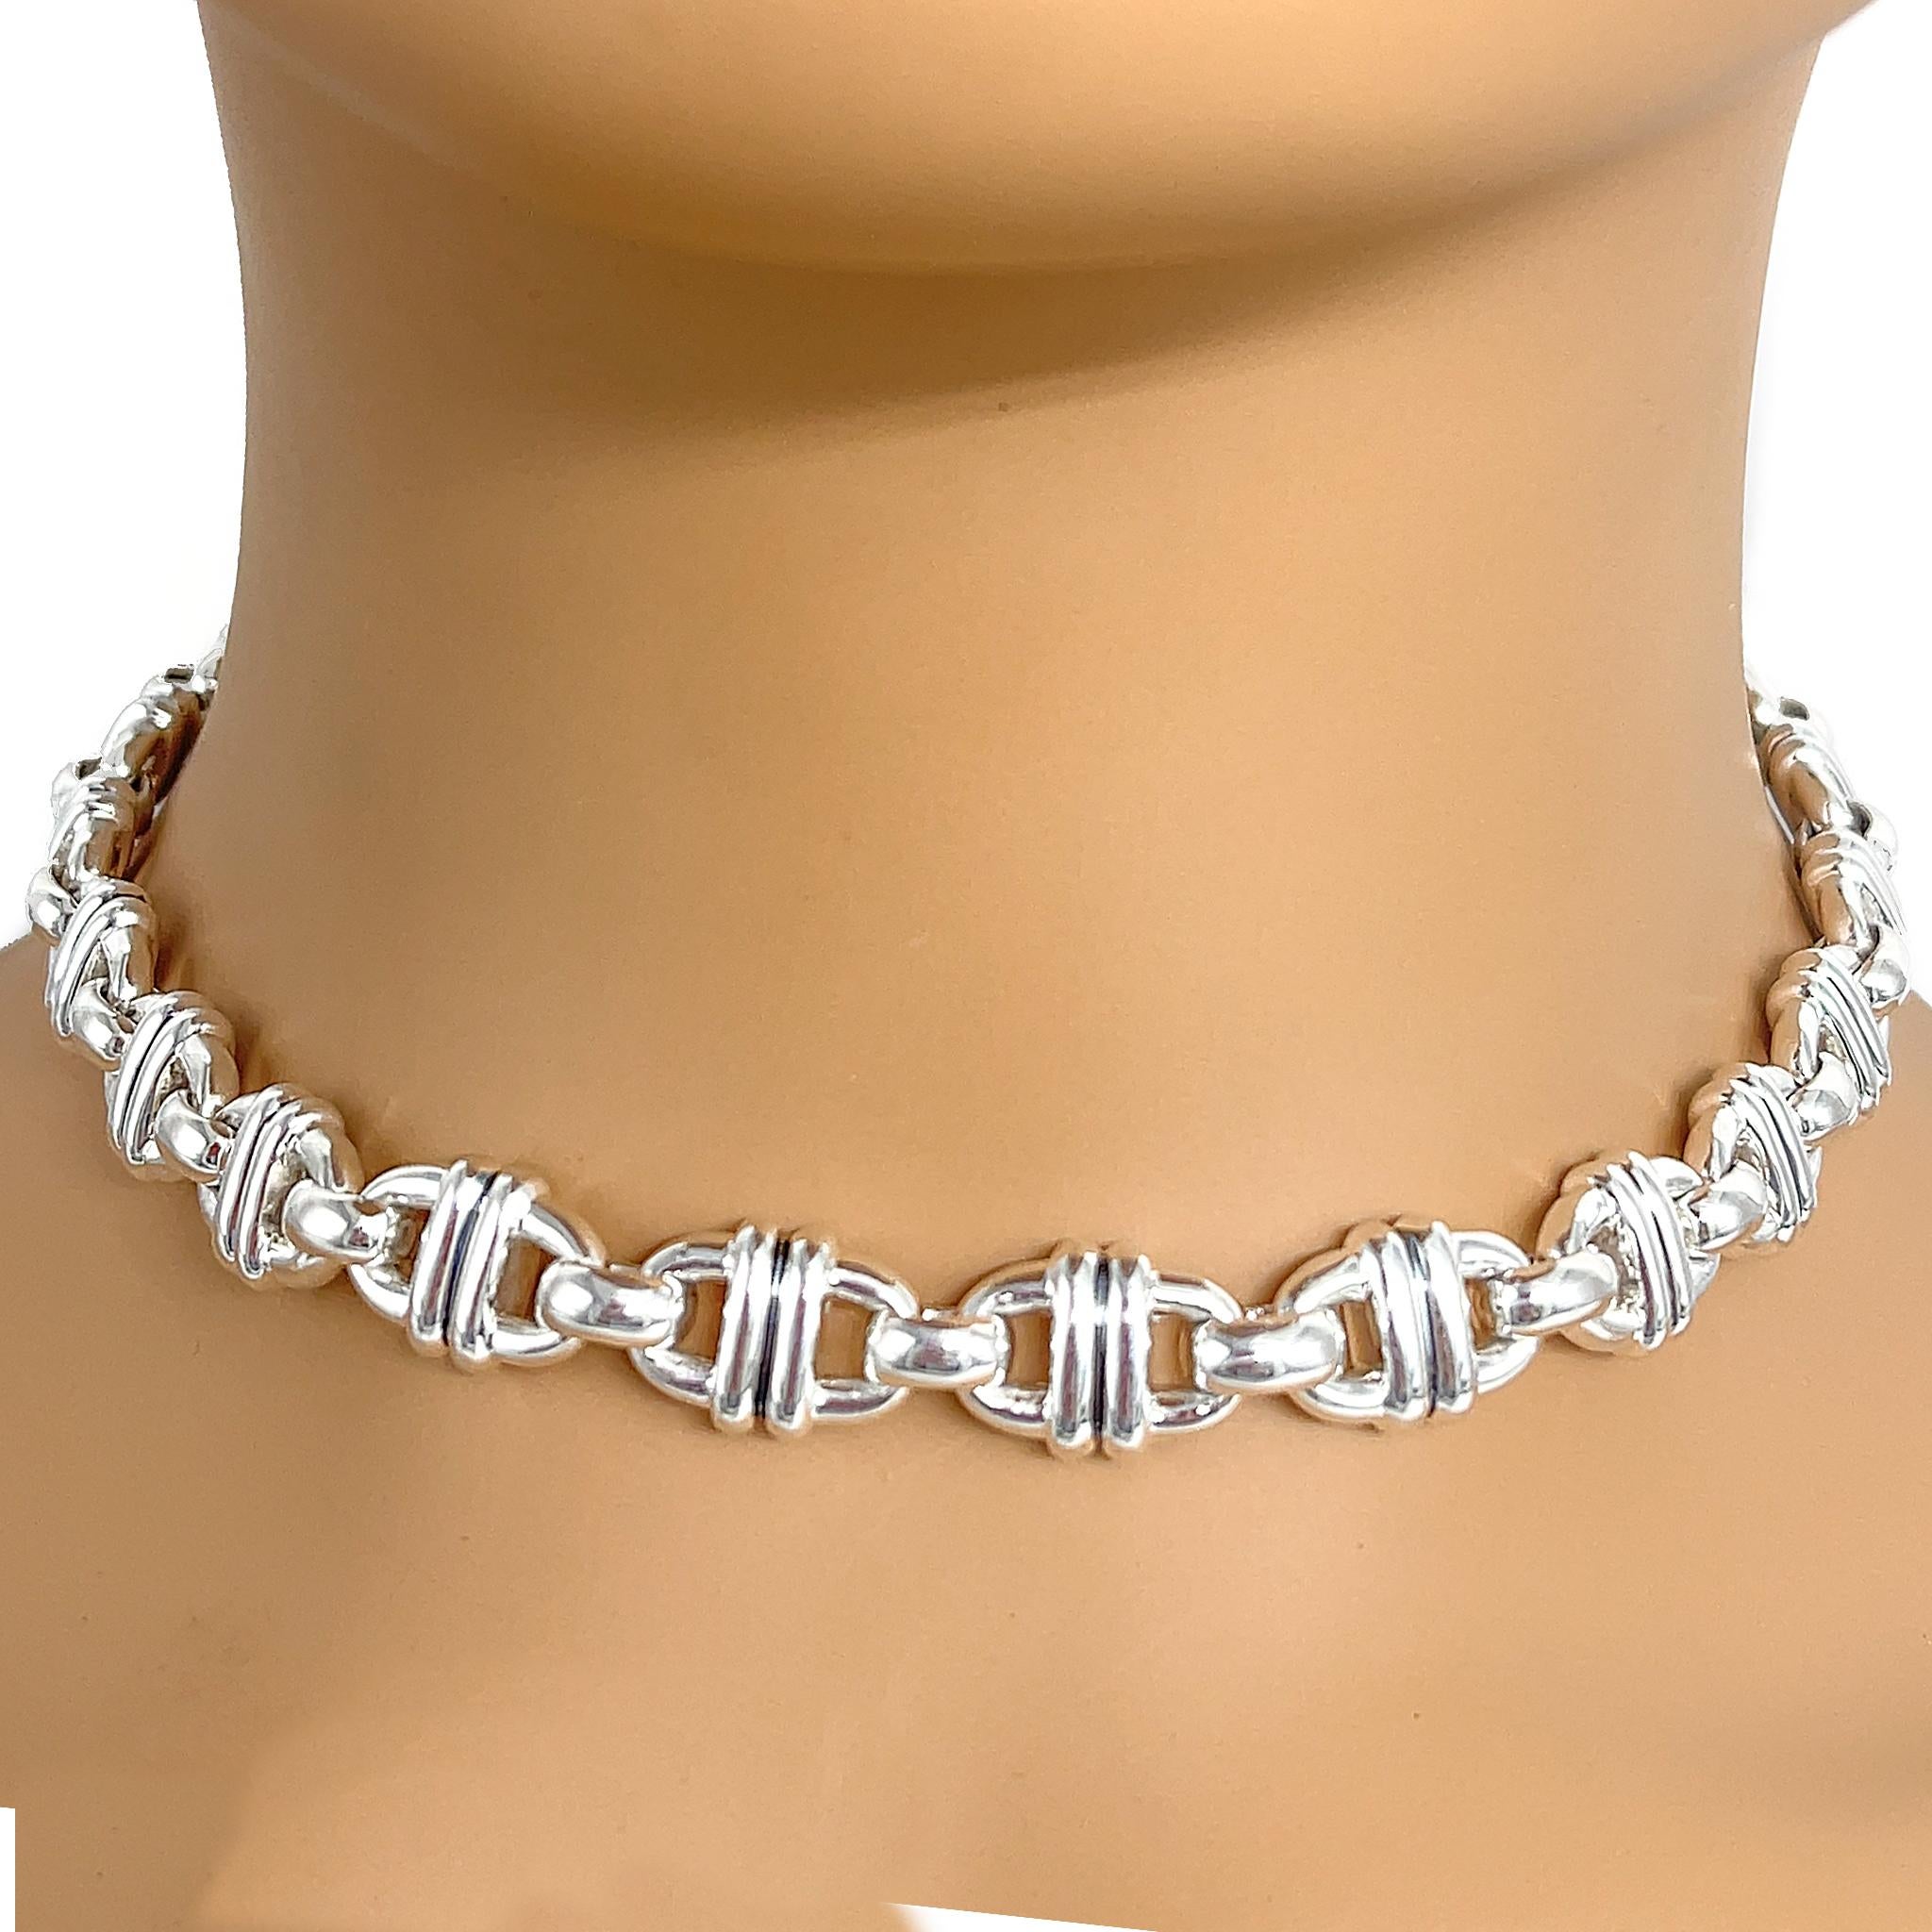 Sterling Silver
Total Weight: 118 grams
Length: 16 inches
Measurement: 10.5 mm link